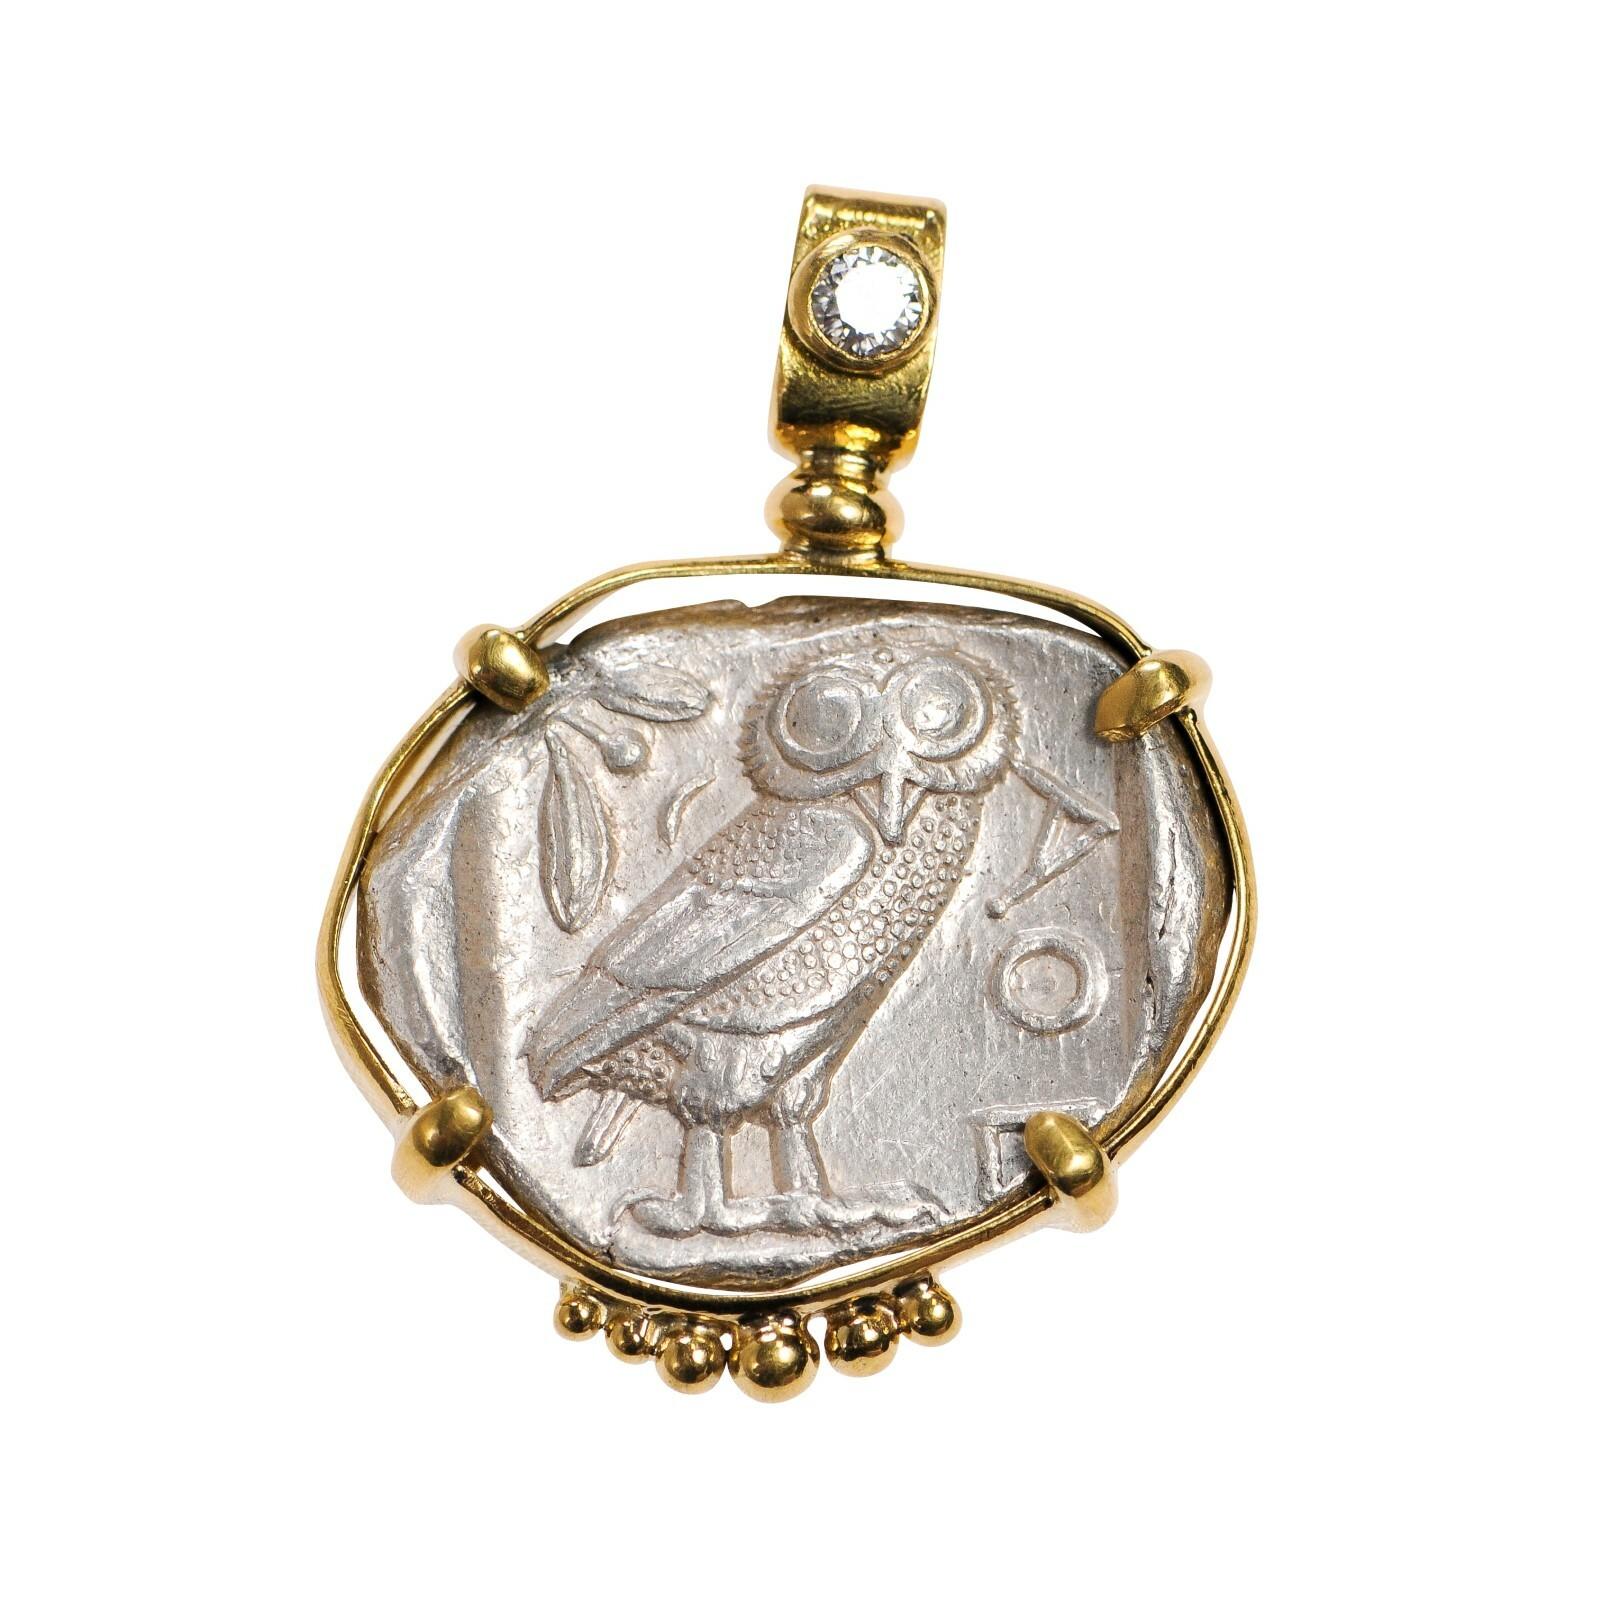 A silver Tetradrachm Owl pendant with Diamond accent and 22 kt gold surround. The delicate gold details add a beautiful touch to this already remarkable Tetradrachm piece. On the reverse side, there is an AOE and owl with an olive sprig and crescent